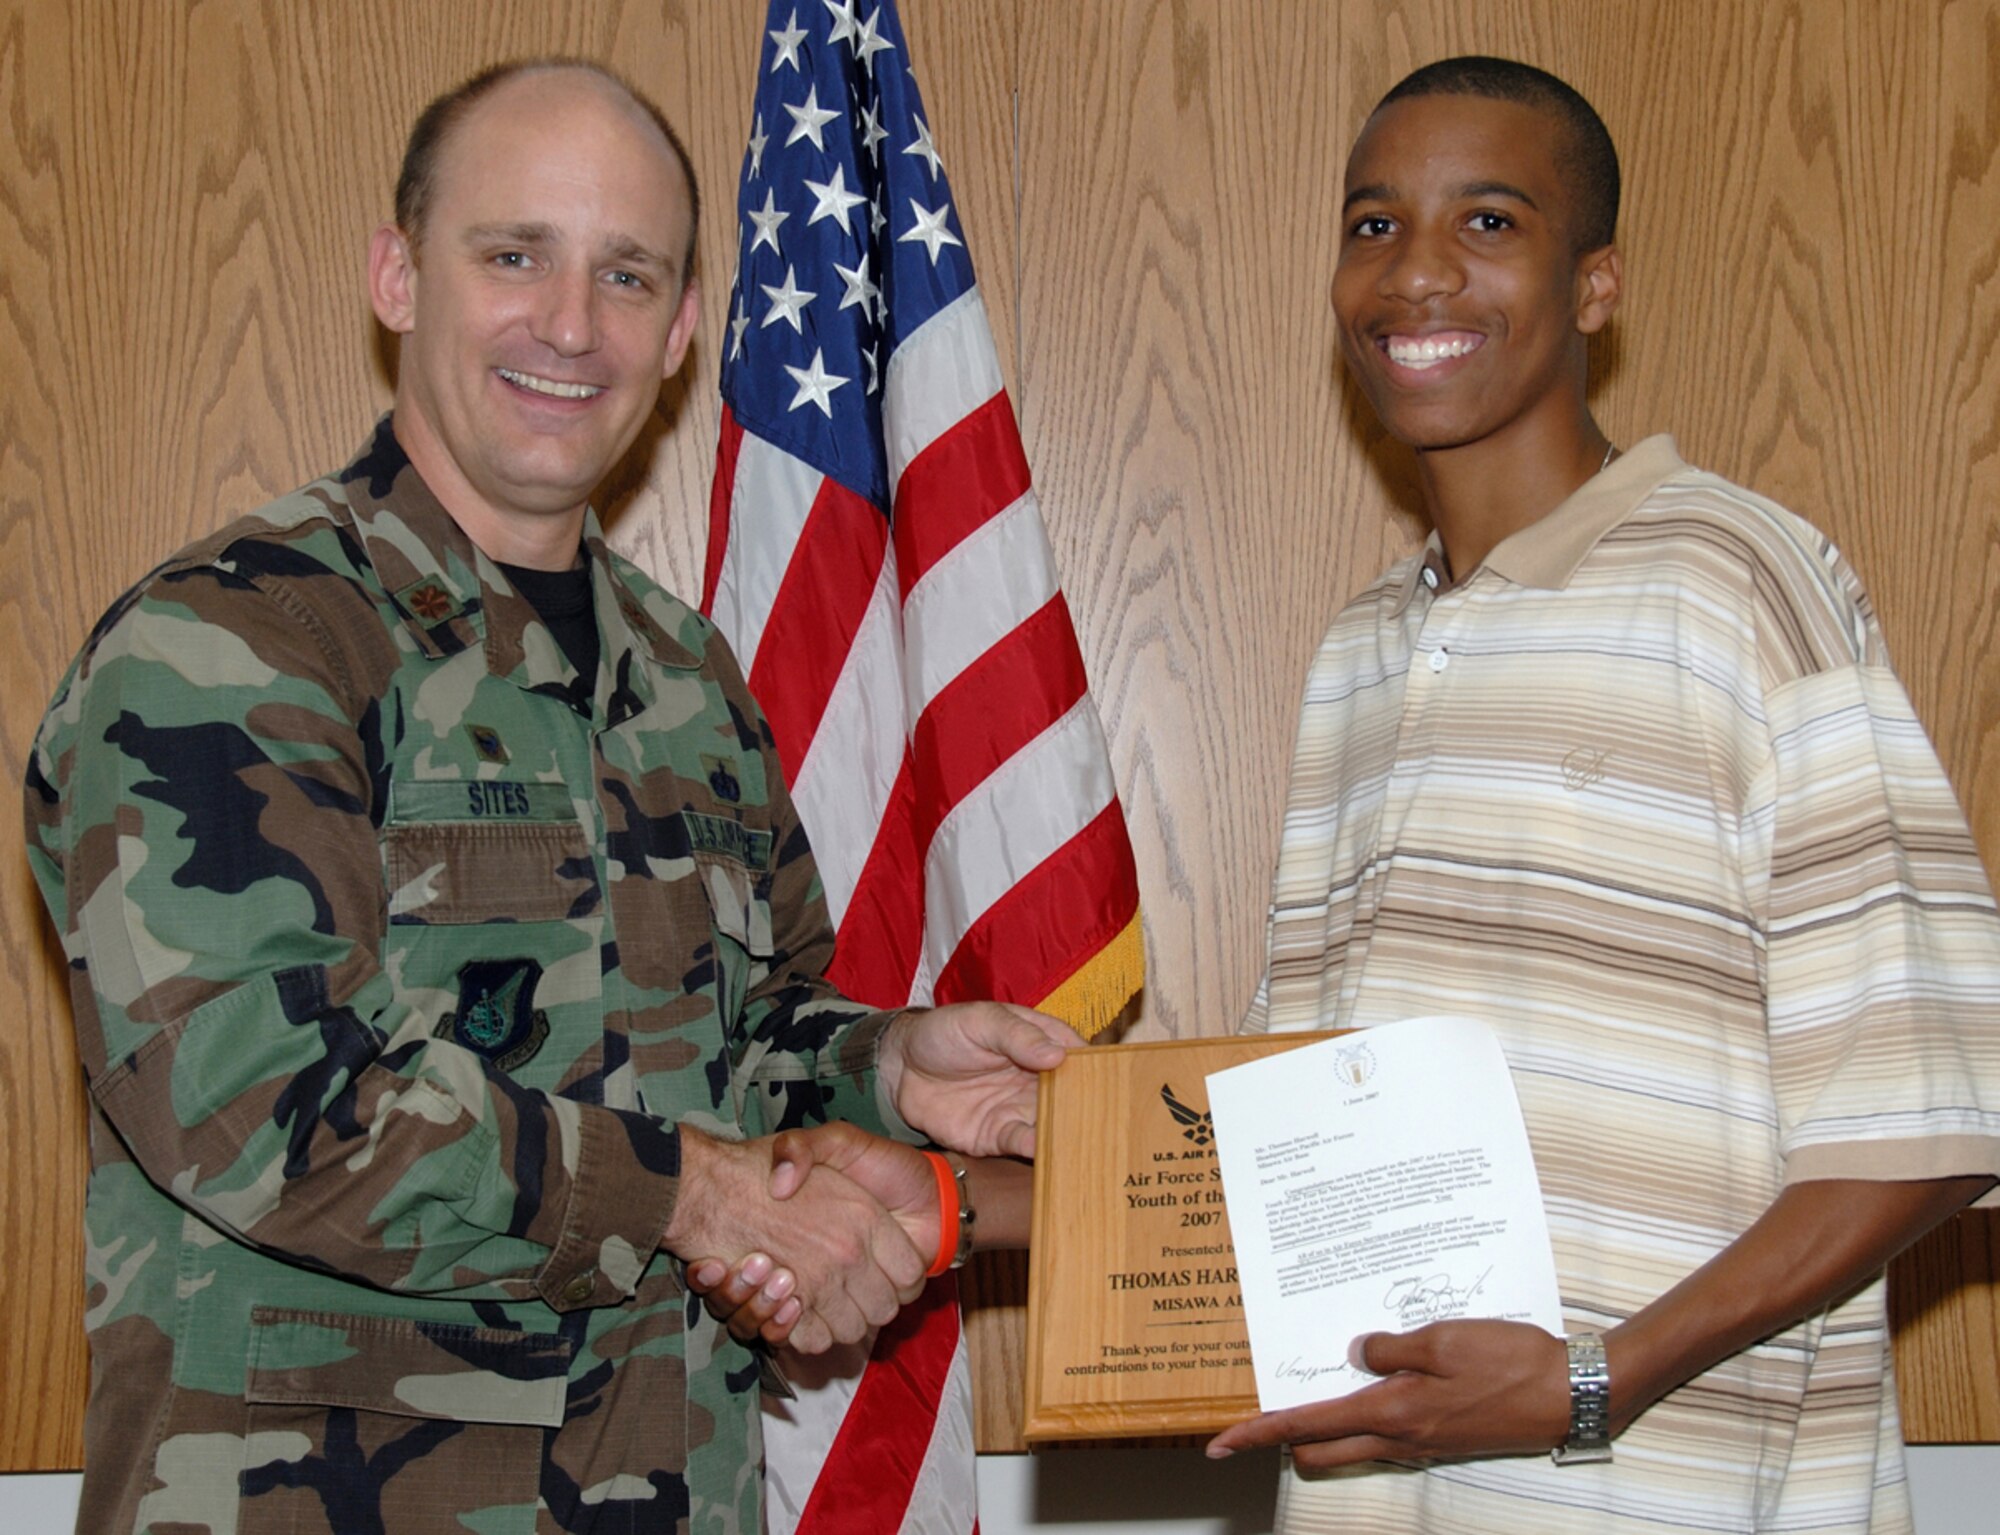 MISAWA AIR BASE, Japan -- Thomas Harwell is presented a plaque June 25 here by Maj. Timothy Sites, 35th Services Squadron commander, for being selected as the 2007 Air Force Services Youth of the Year for Misawa. The high-school graduate also received $1,000 for college. He earned the award for his base and community contributions. Thomas is the son of Master Sgt. Barry and Netra Harwell, 35th Security Forces Squadron. (U.S. Air Force photo by Senior Airman Laura McFarlane)